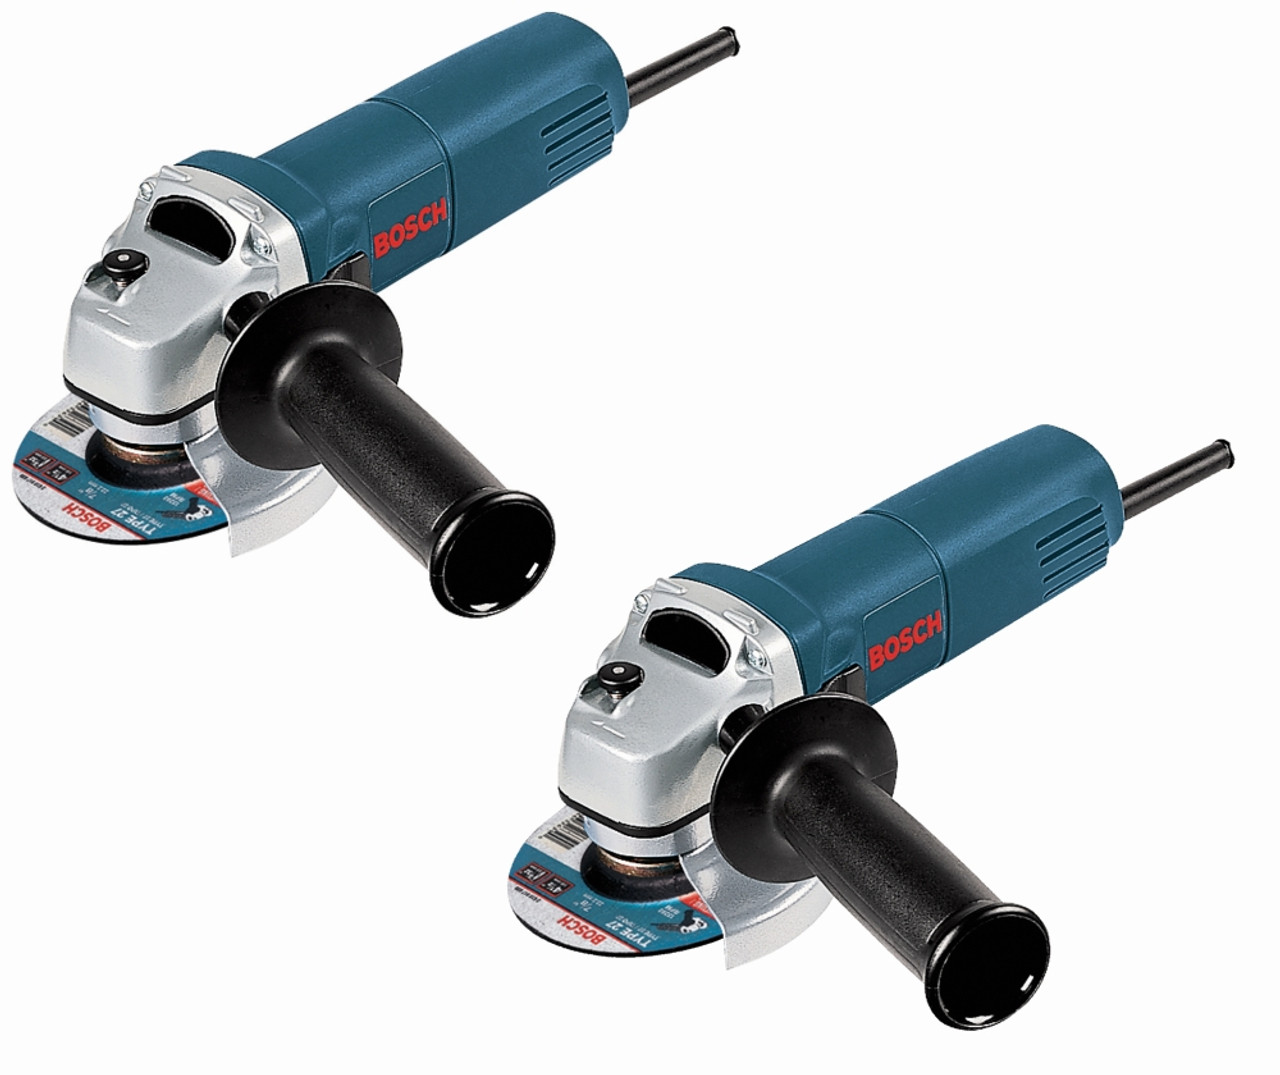 Bosch 1375A-2PK 4-1/2 In. 6A Angle Grinder